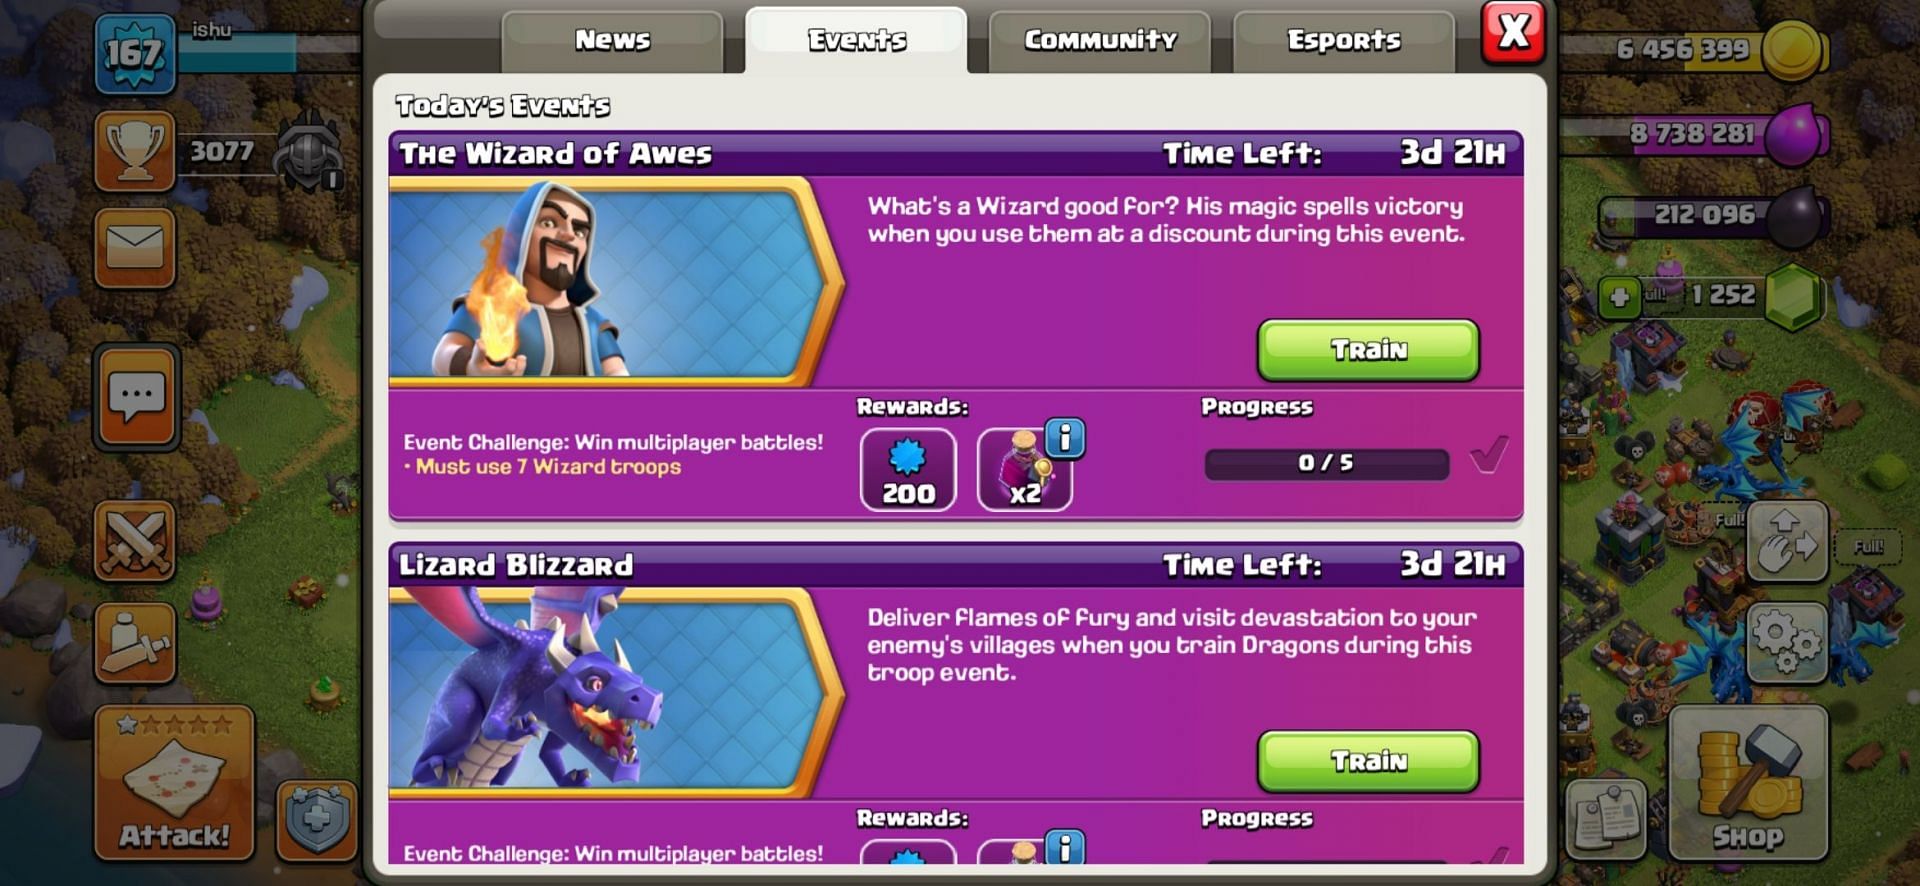 The Wizards of Awes challenge in Clash of Clans (Image via Sportskeeda)